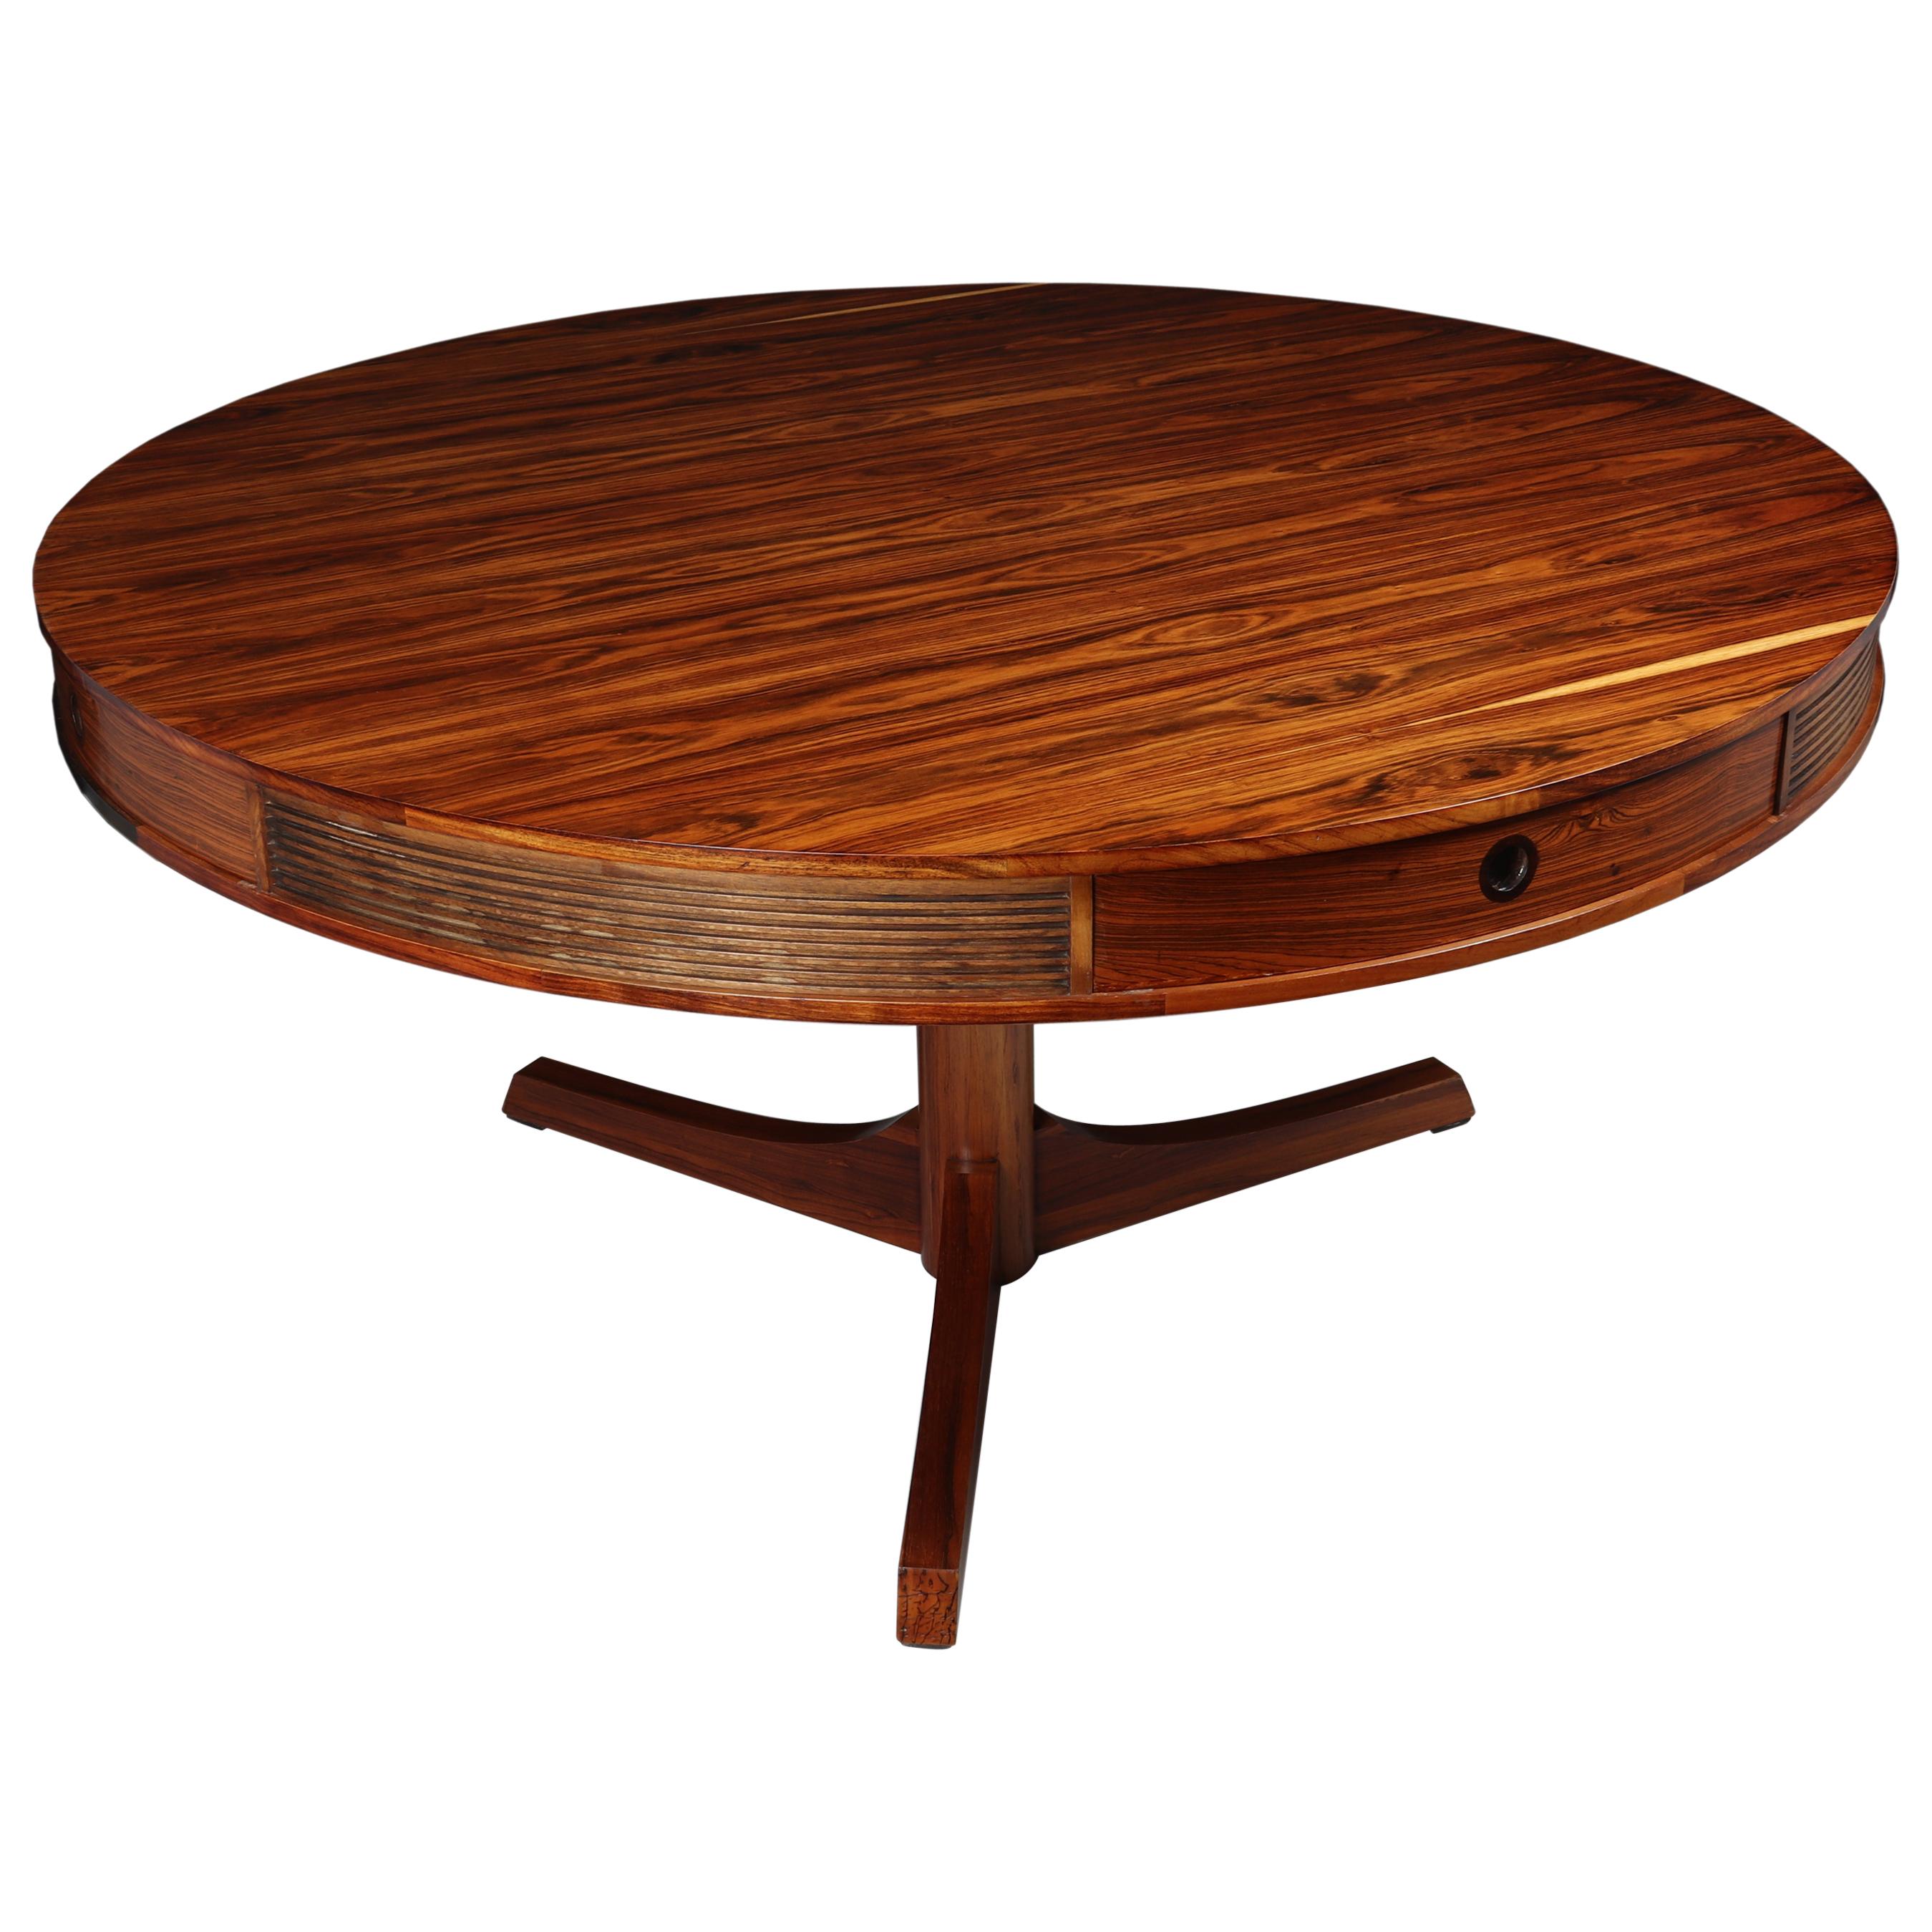 20th Century Rosewood Drum Table by Robert Heritage for Archie Shine